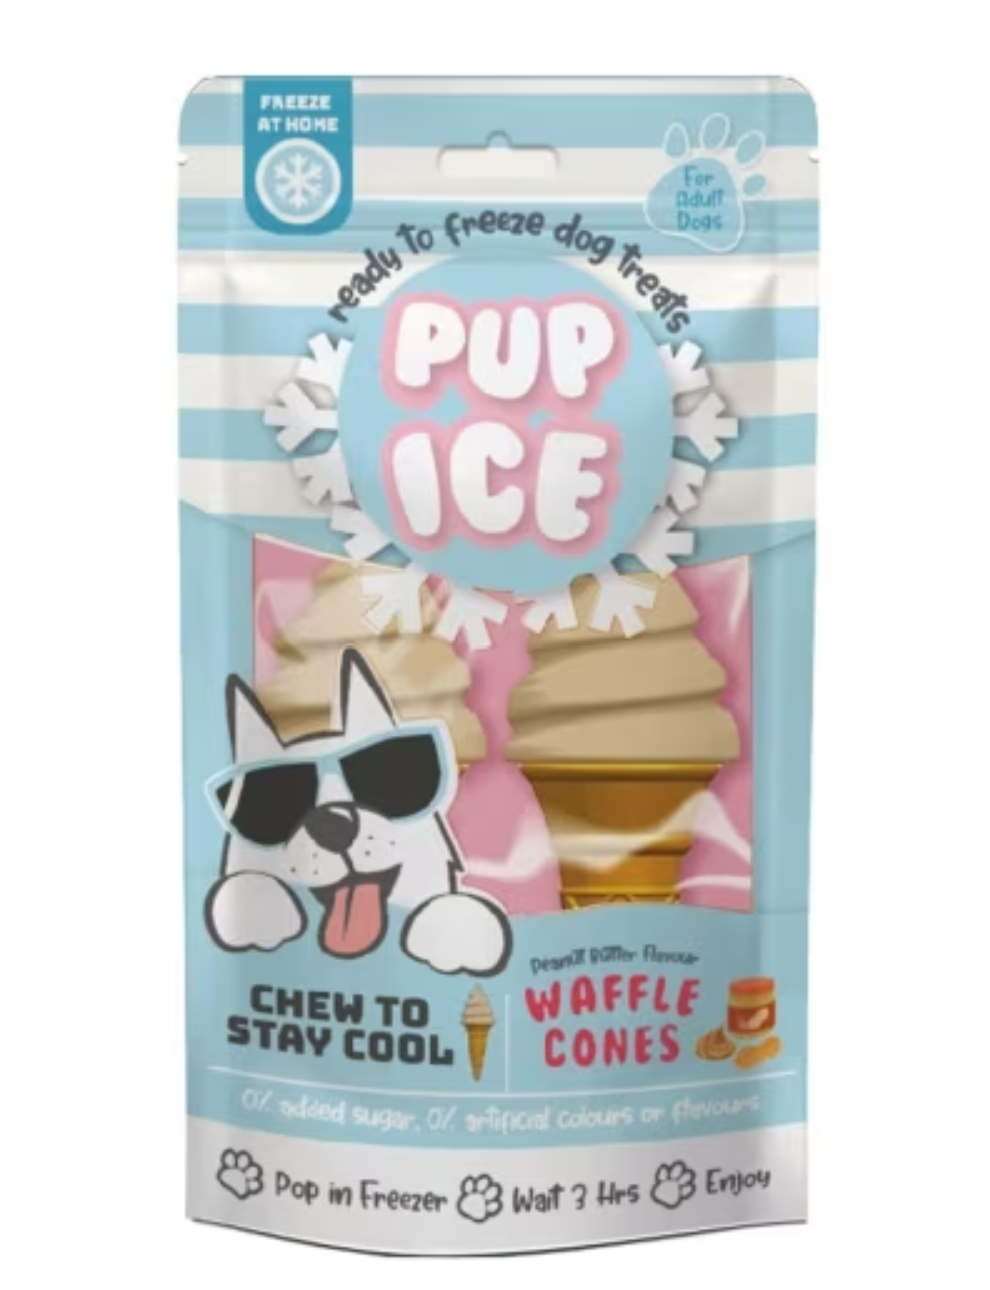 Ethical Pet Pup Ice Waffle Cones - Vanilla Peanut Butter 2pk